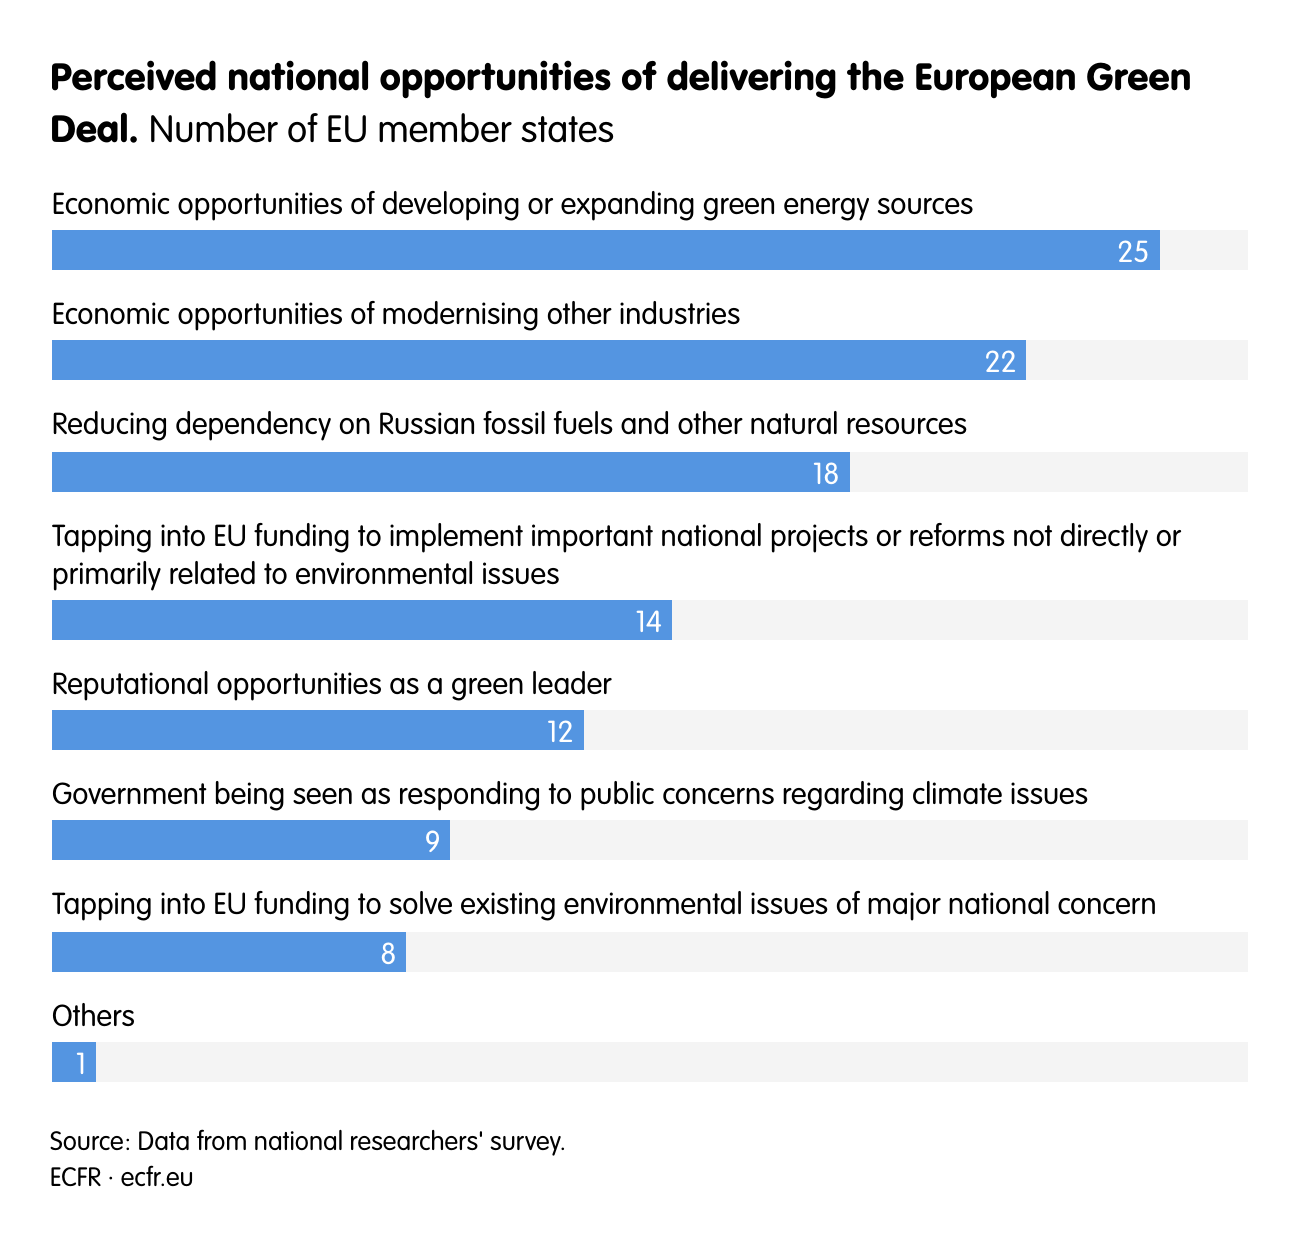 Perceived national opportunities of delivering the European Green Deal.